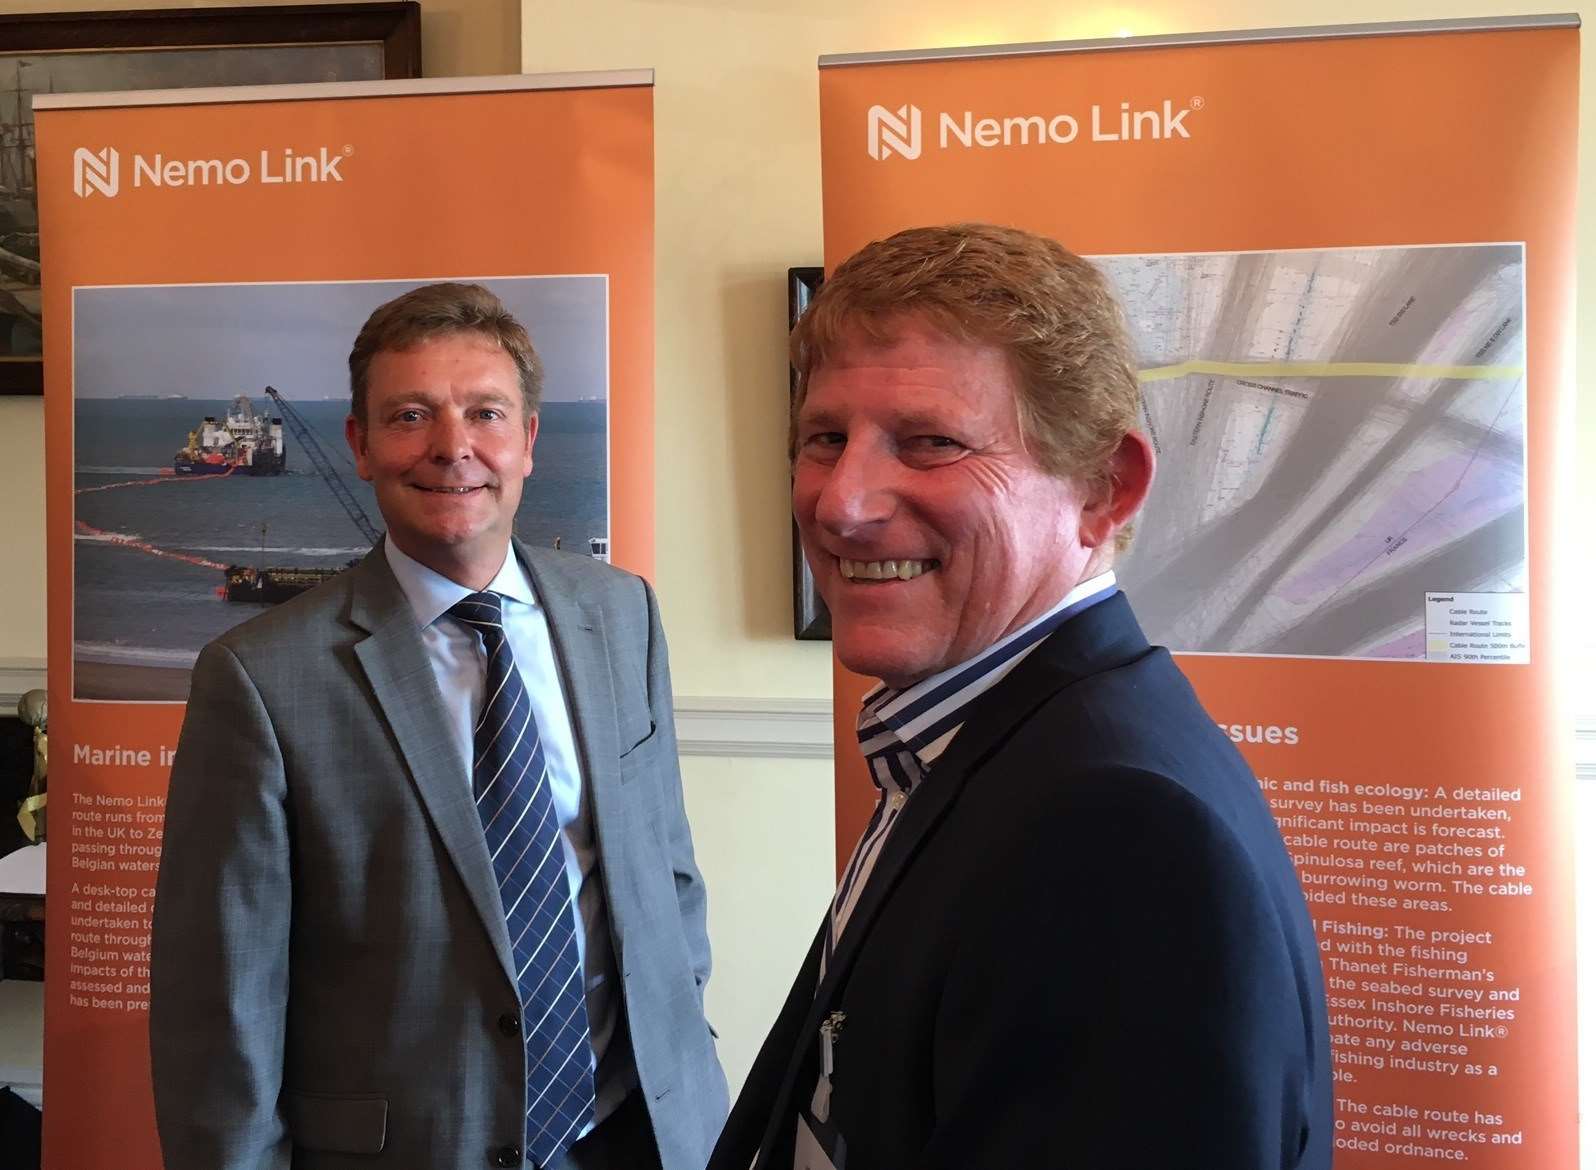 MP Craig Mackinlay at the latest Nemo Link event